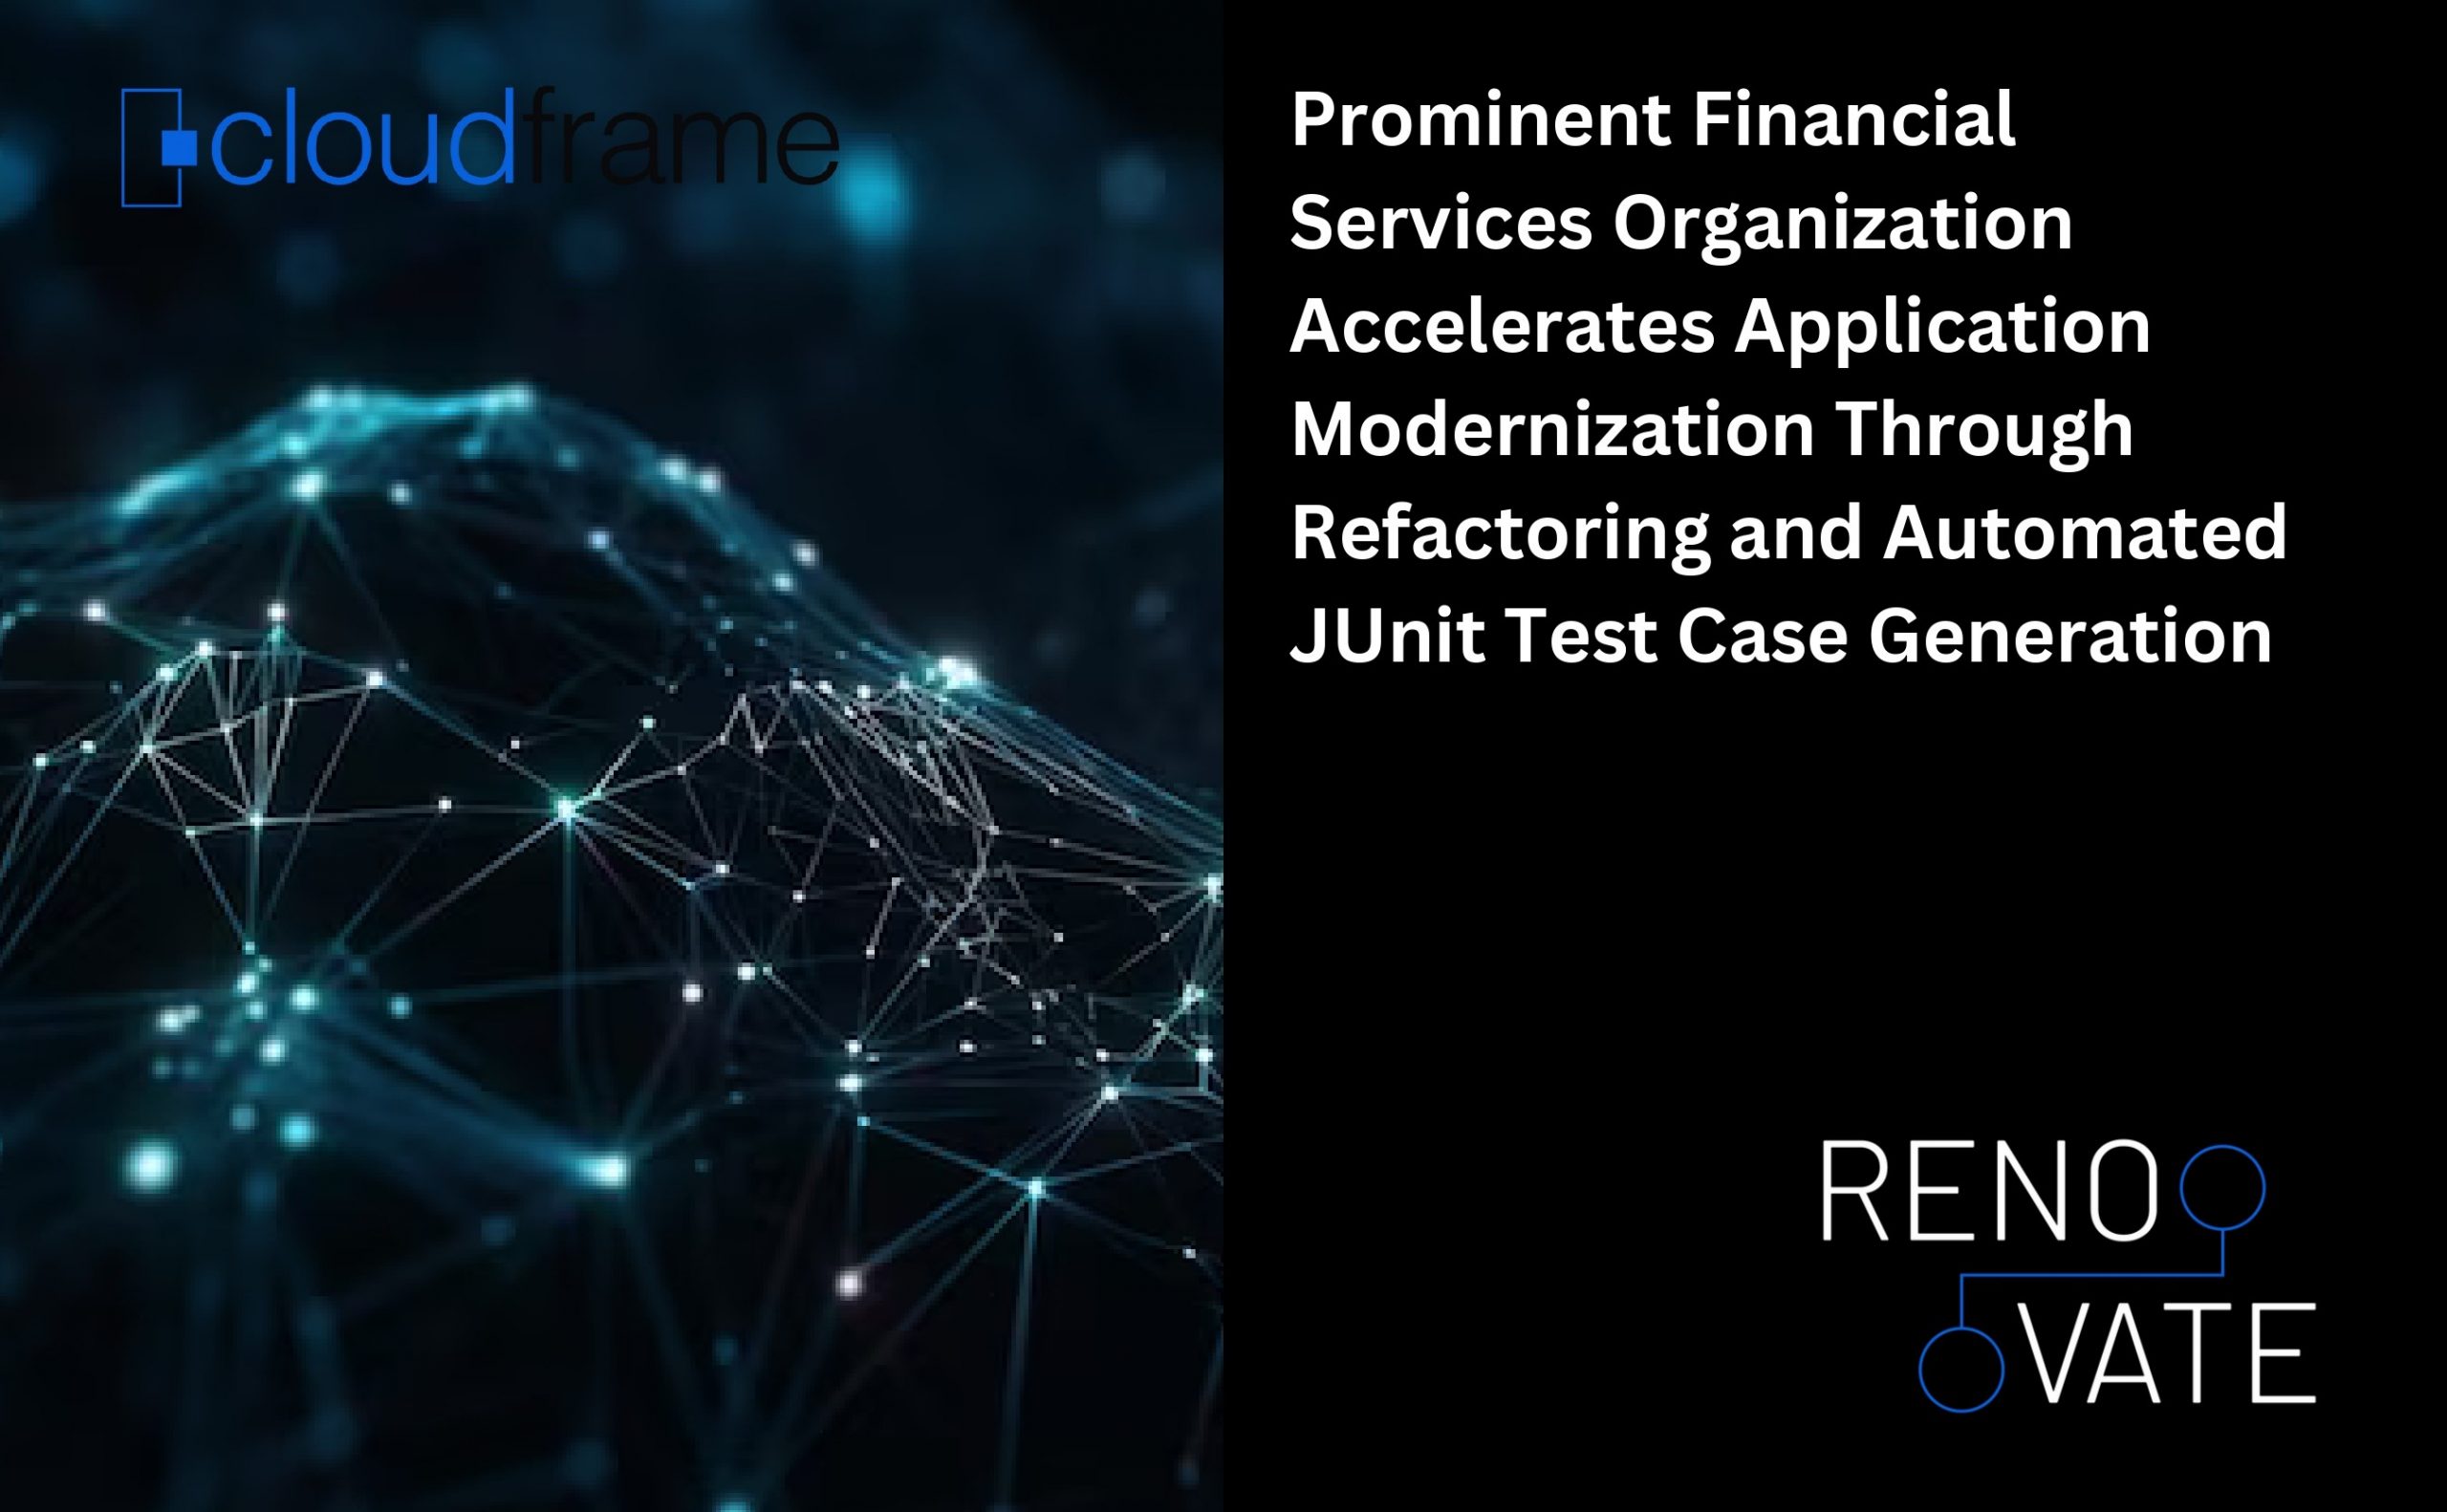 Prominent Financial Services Organization Accelerates Application Modernization Through Refactoring and Automated JUnit Test Case Generation